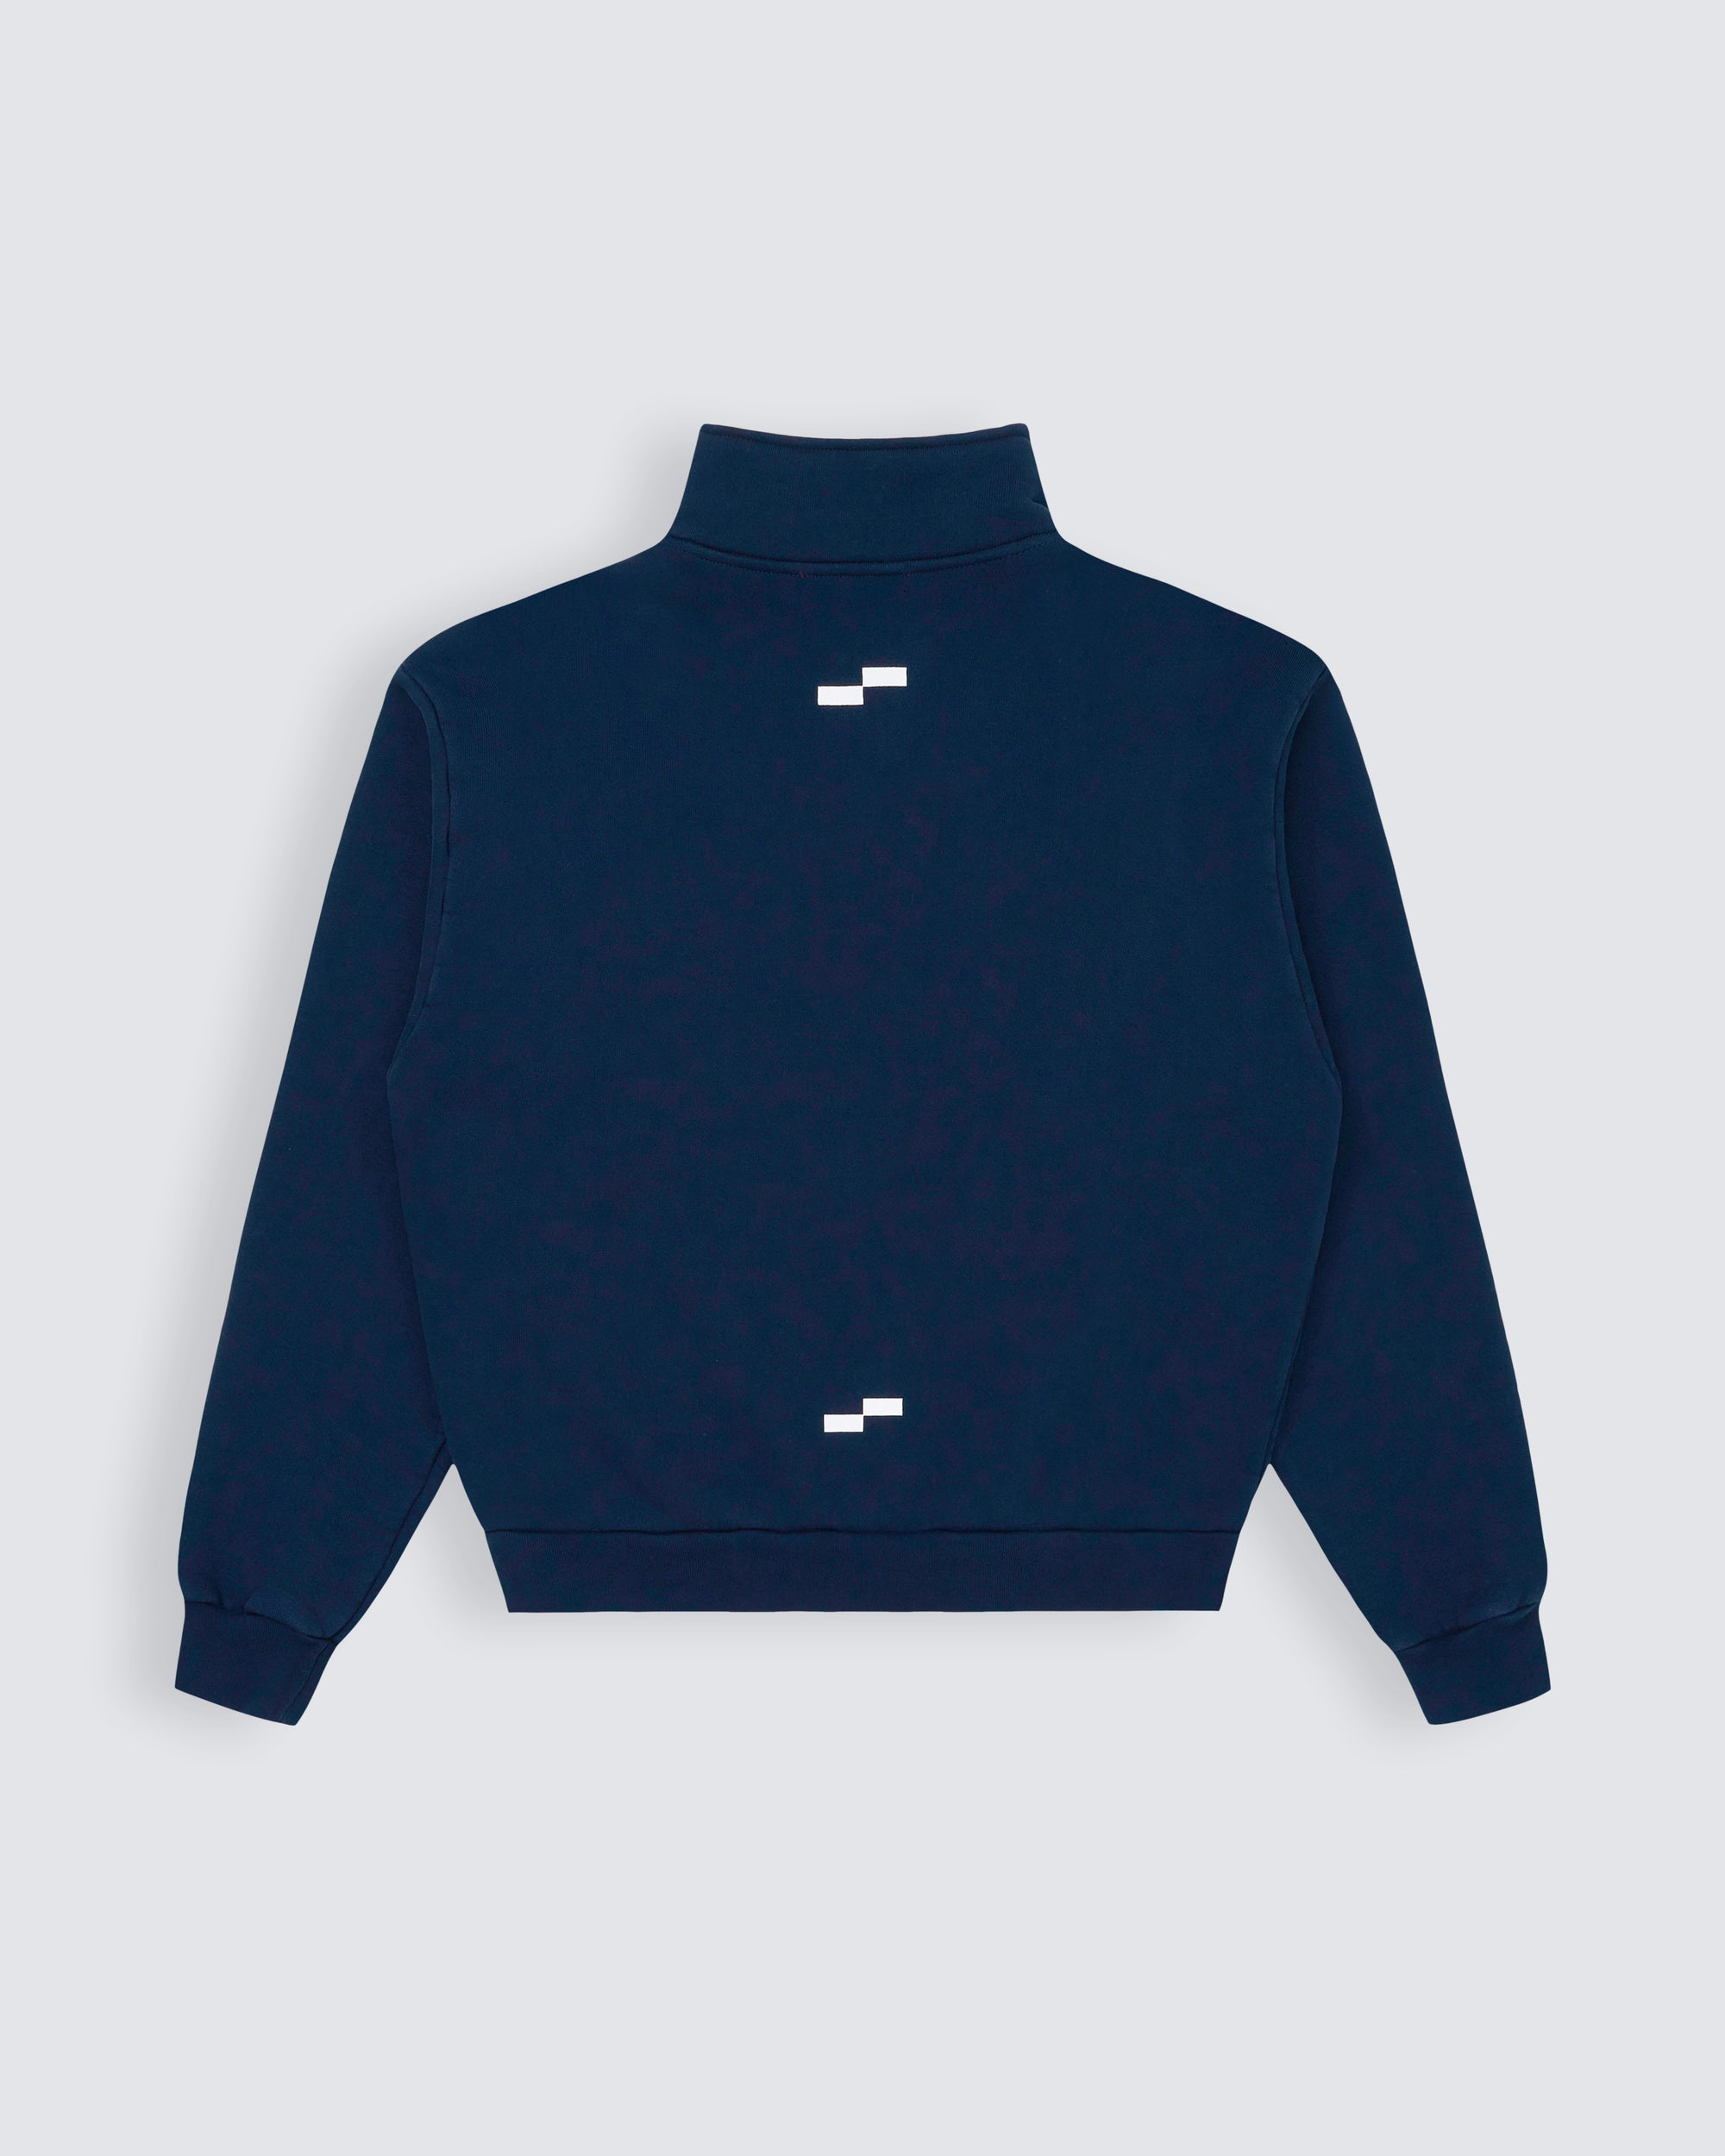 House iD sports zip up top in navy